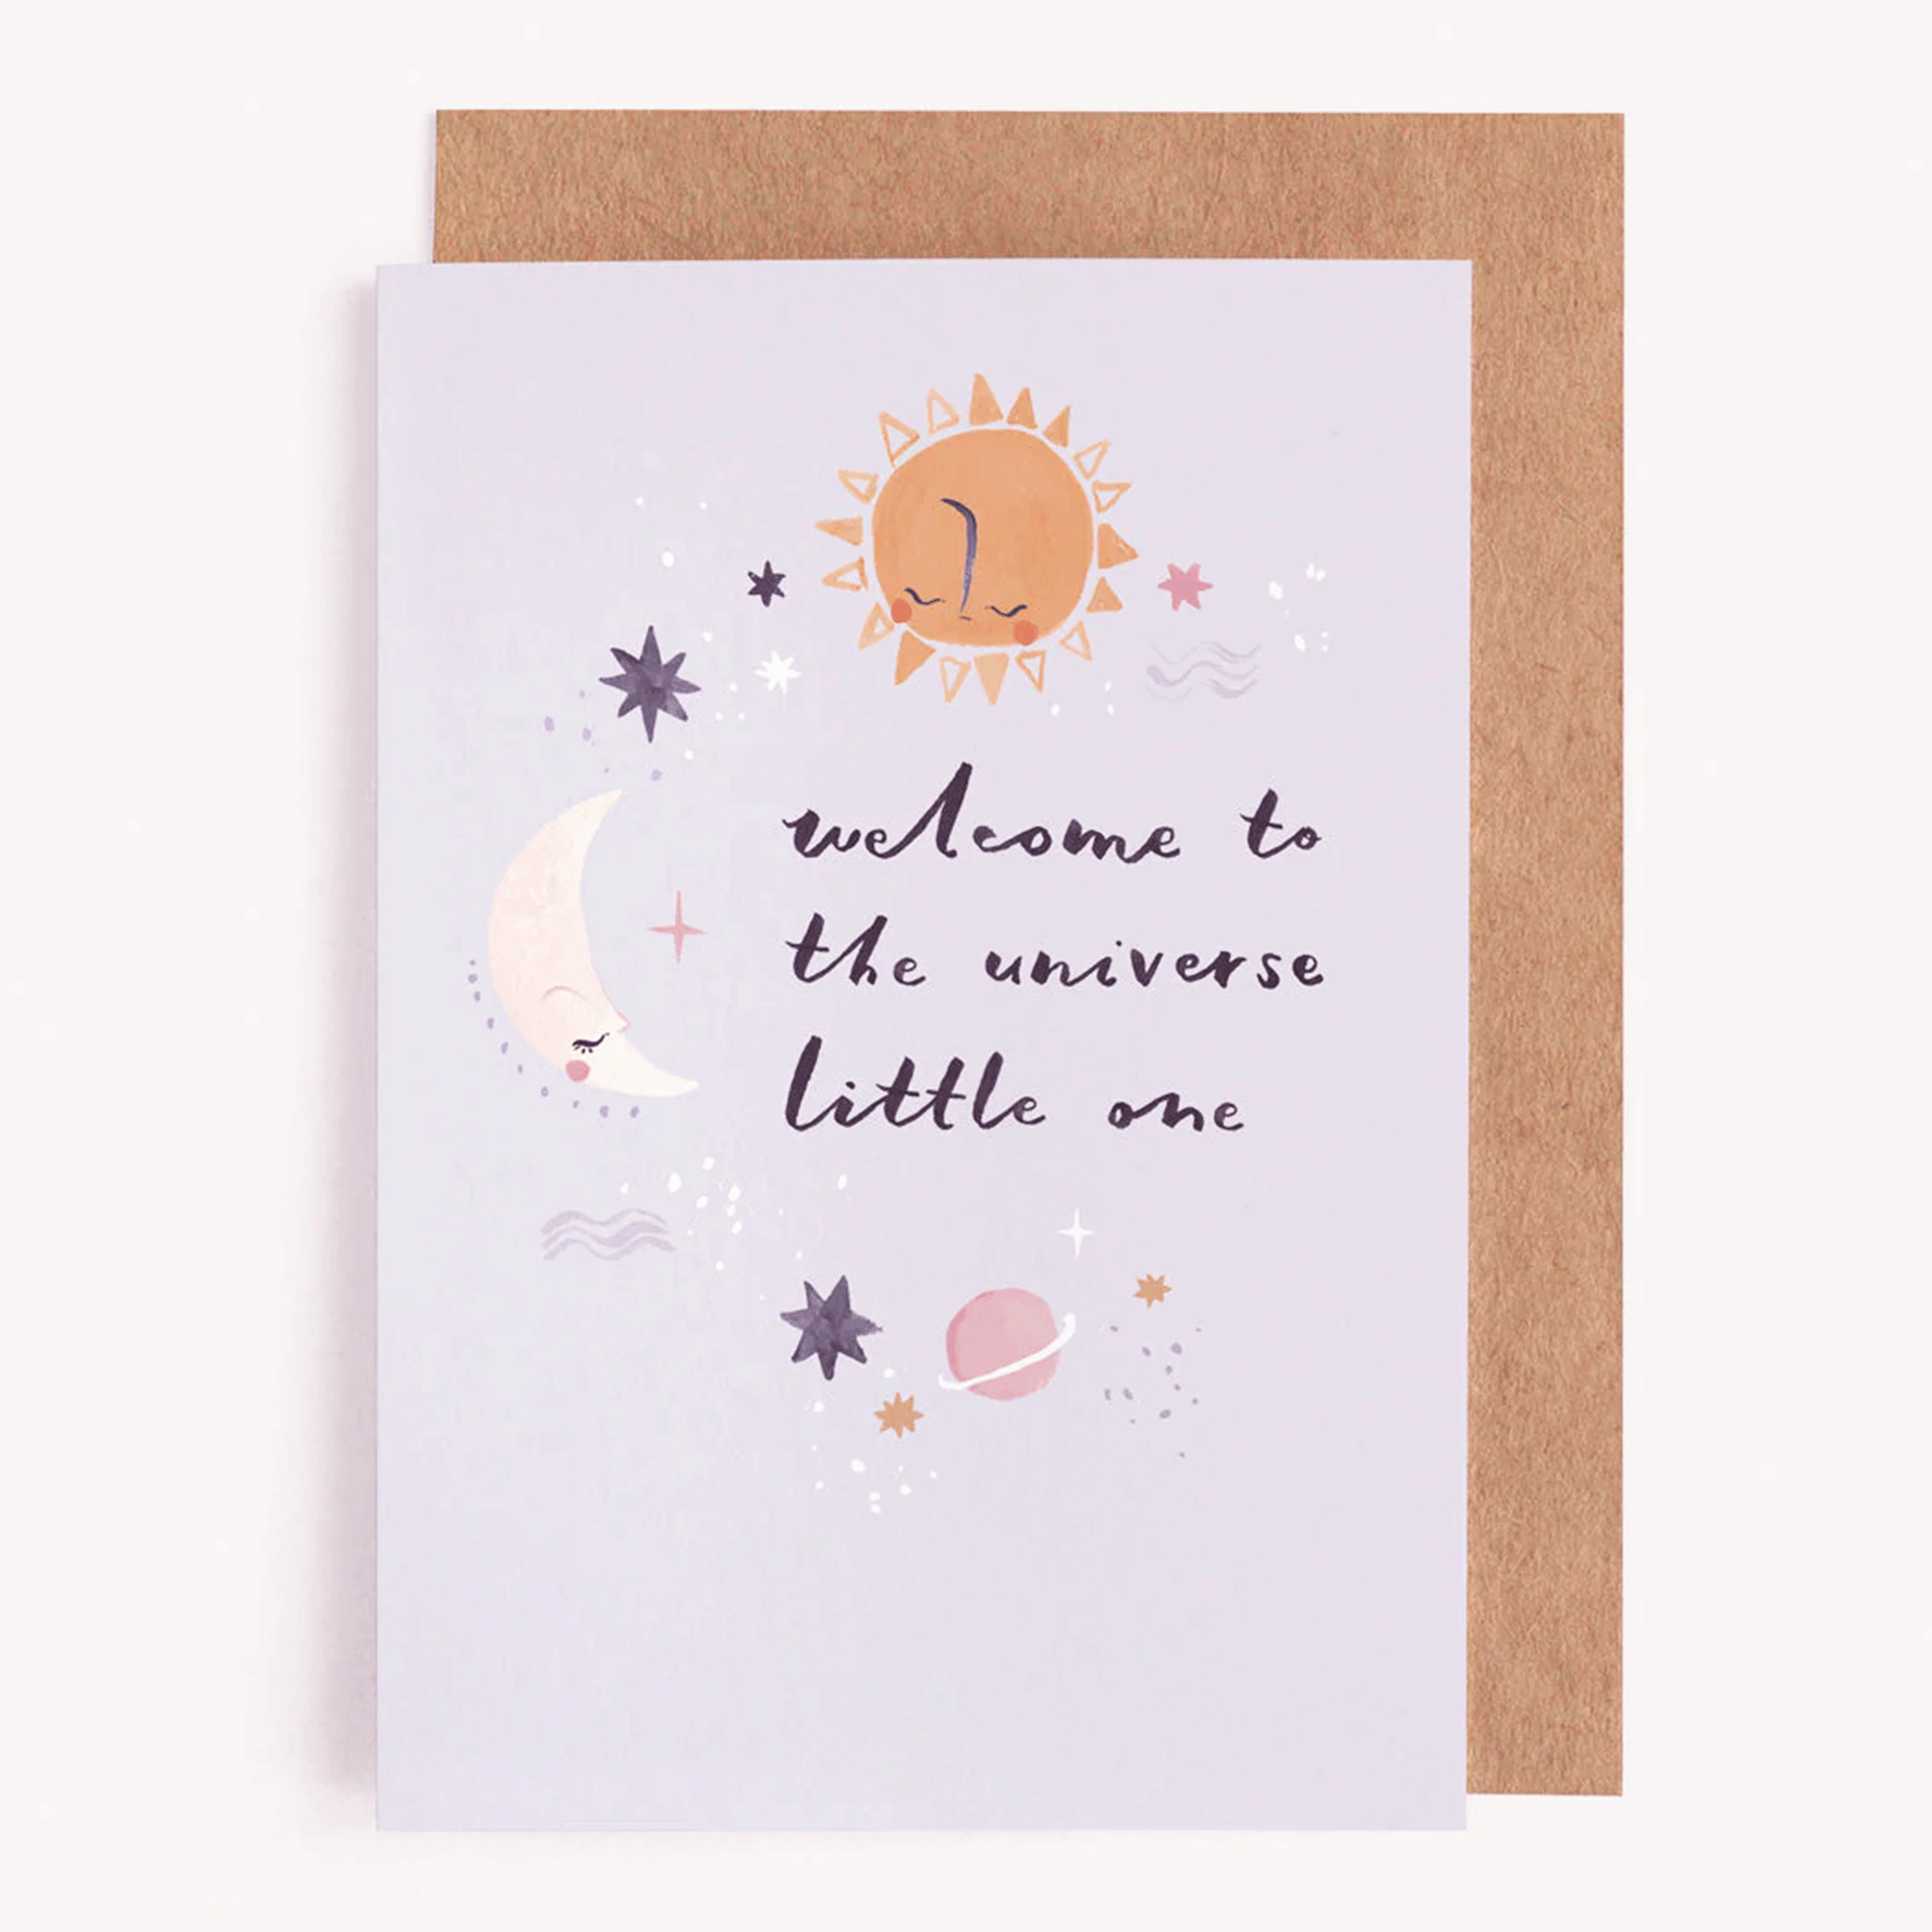 On a white background is a light blue card with illustrations of a sun, moon, and stars along with cursive text that reads, "welcome to the universe little one". 